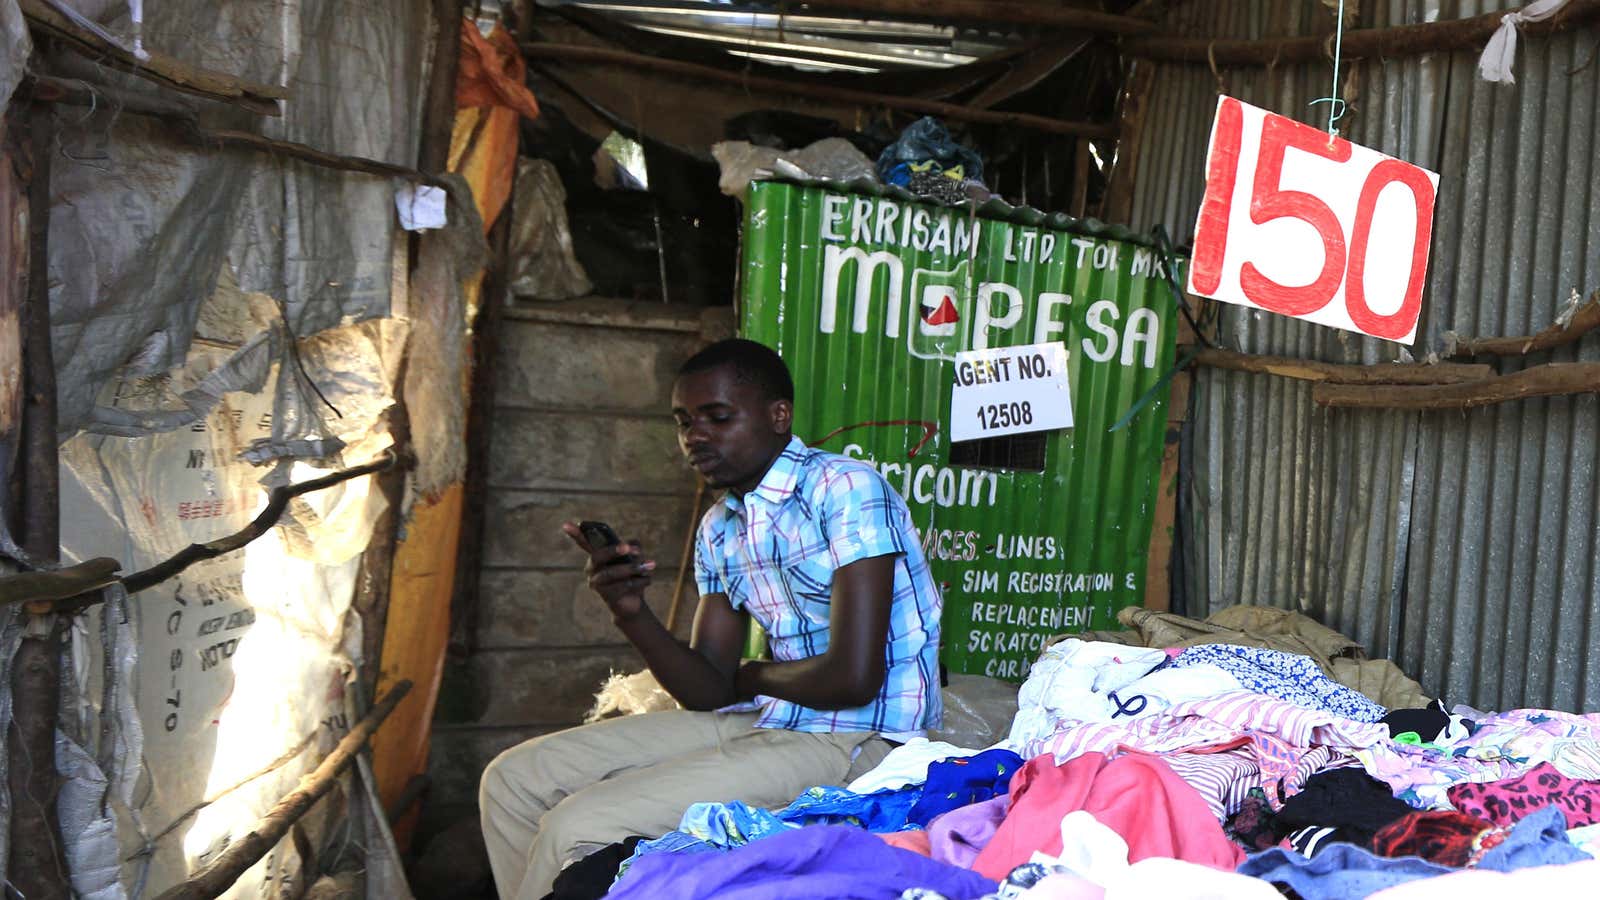 IBM is using M-Pesa transactions to determine credit scores in Africa.